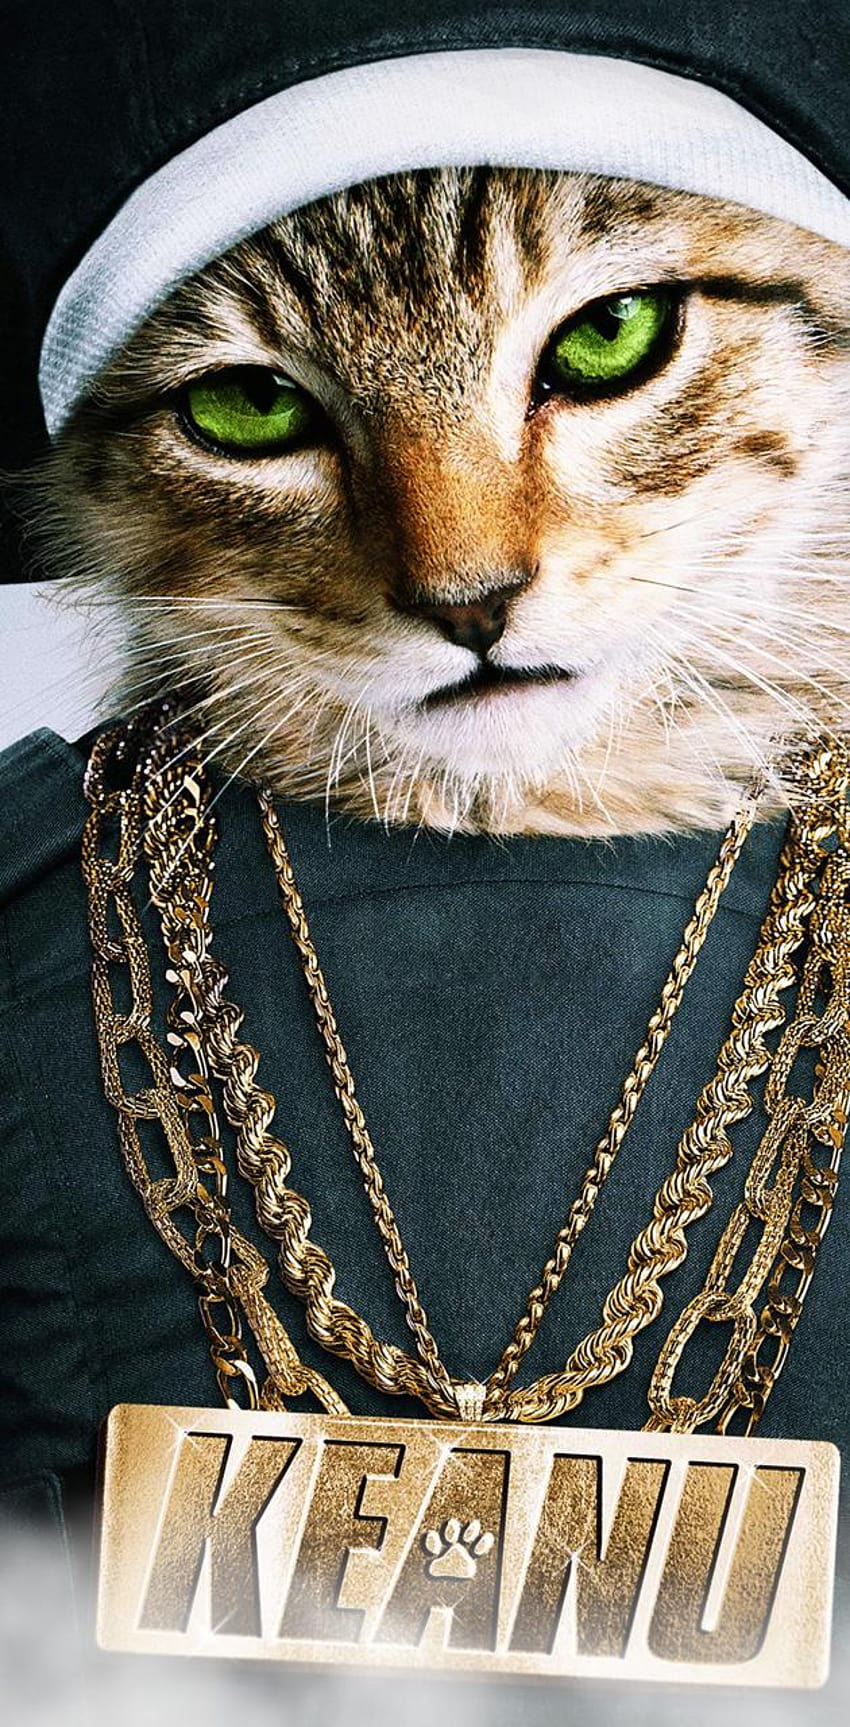 Swag cat by woowbrn123 HD phone wallpaper